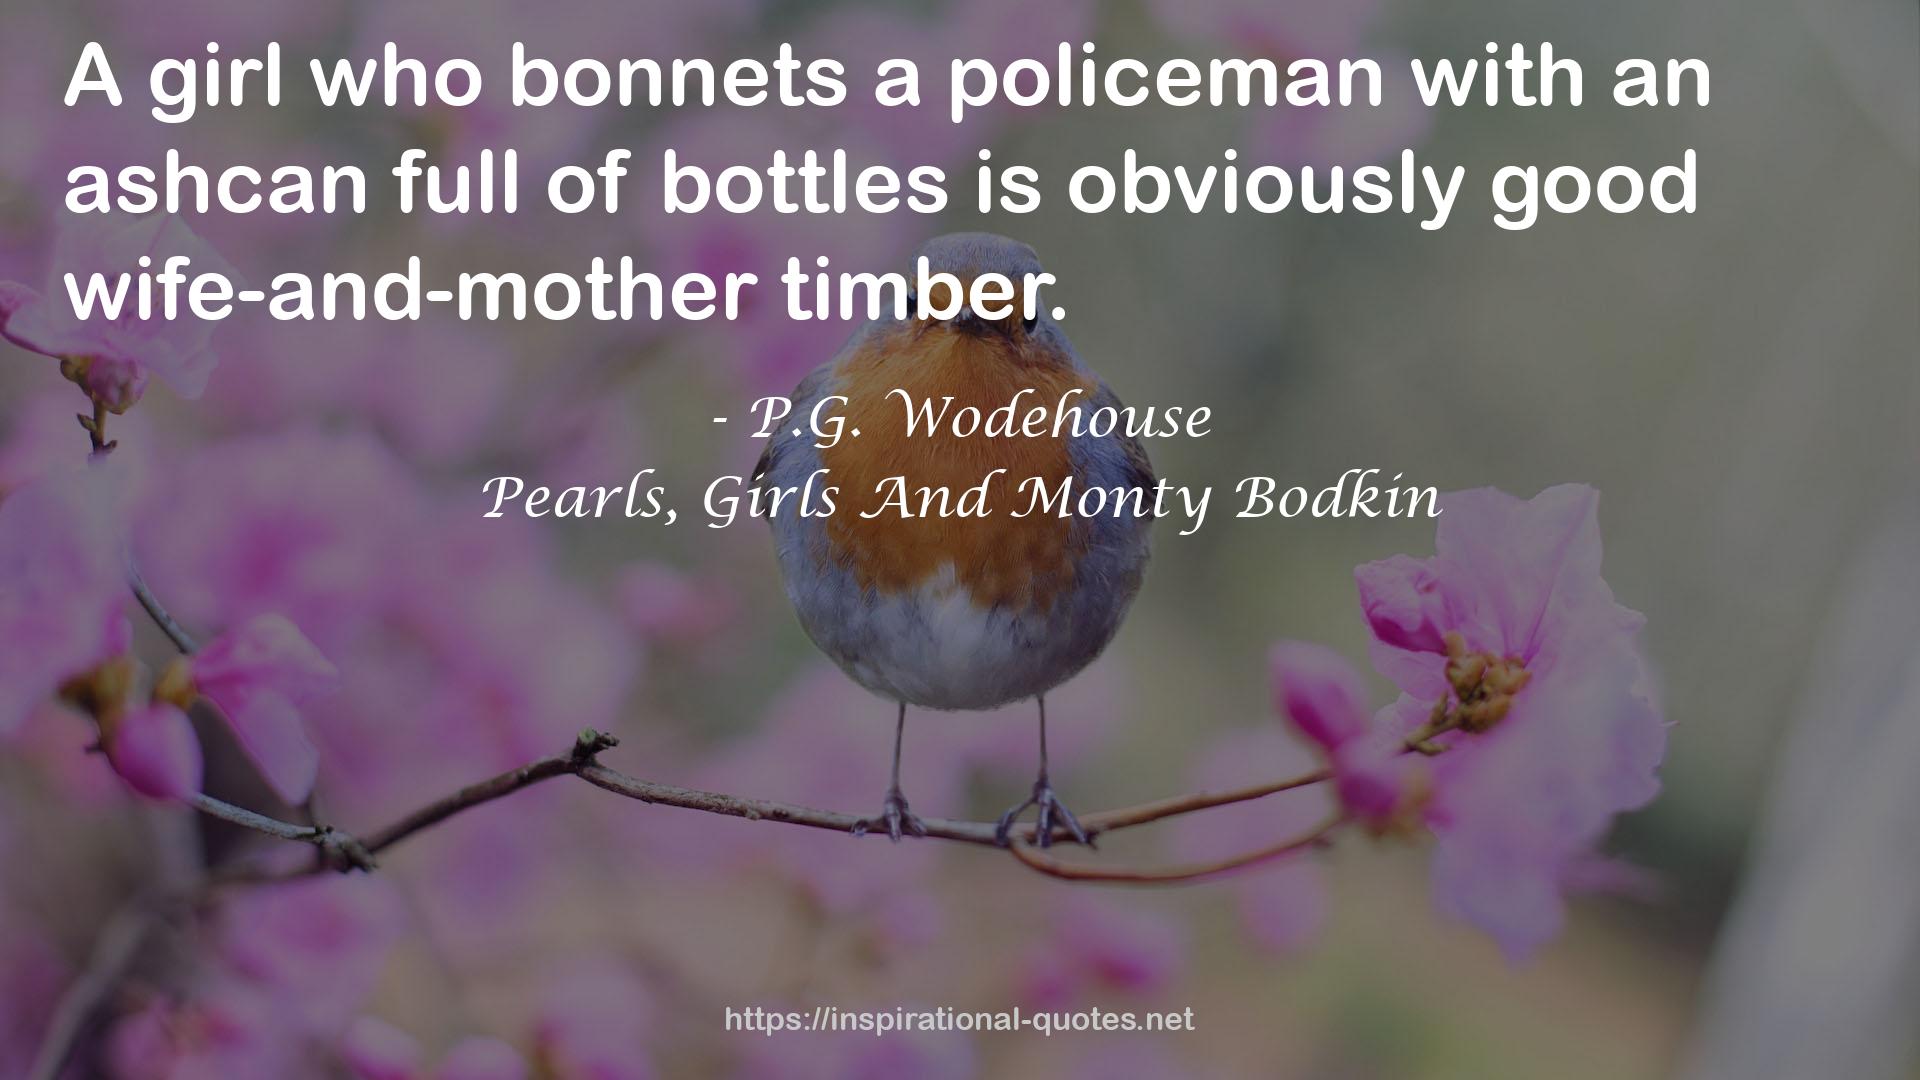 Pearls, Girls And Monty Bodkin QUOTES